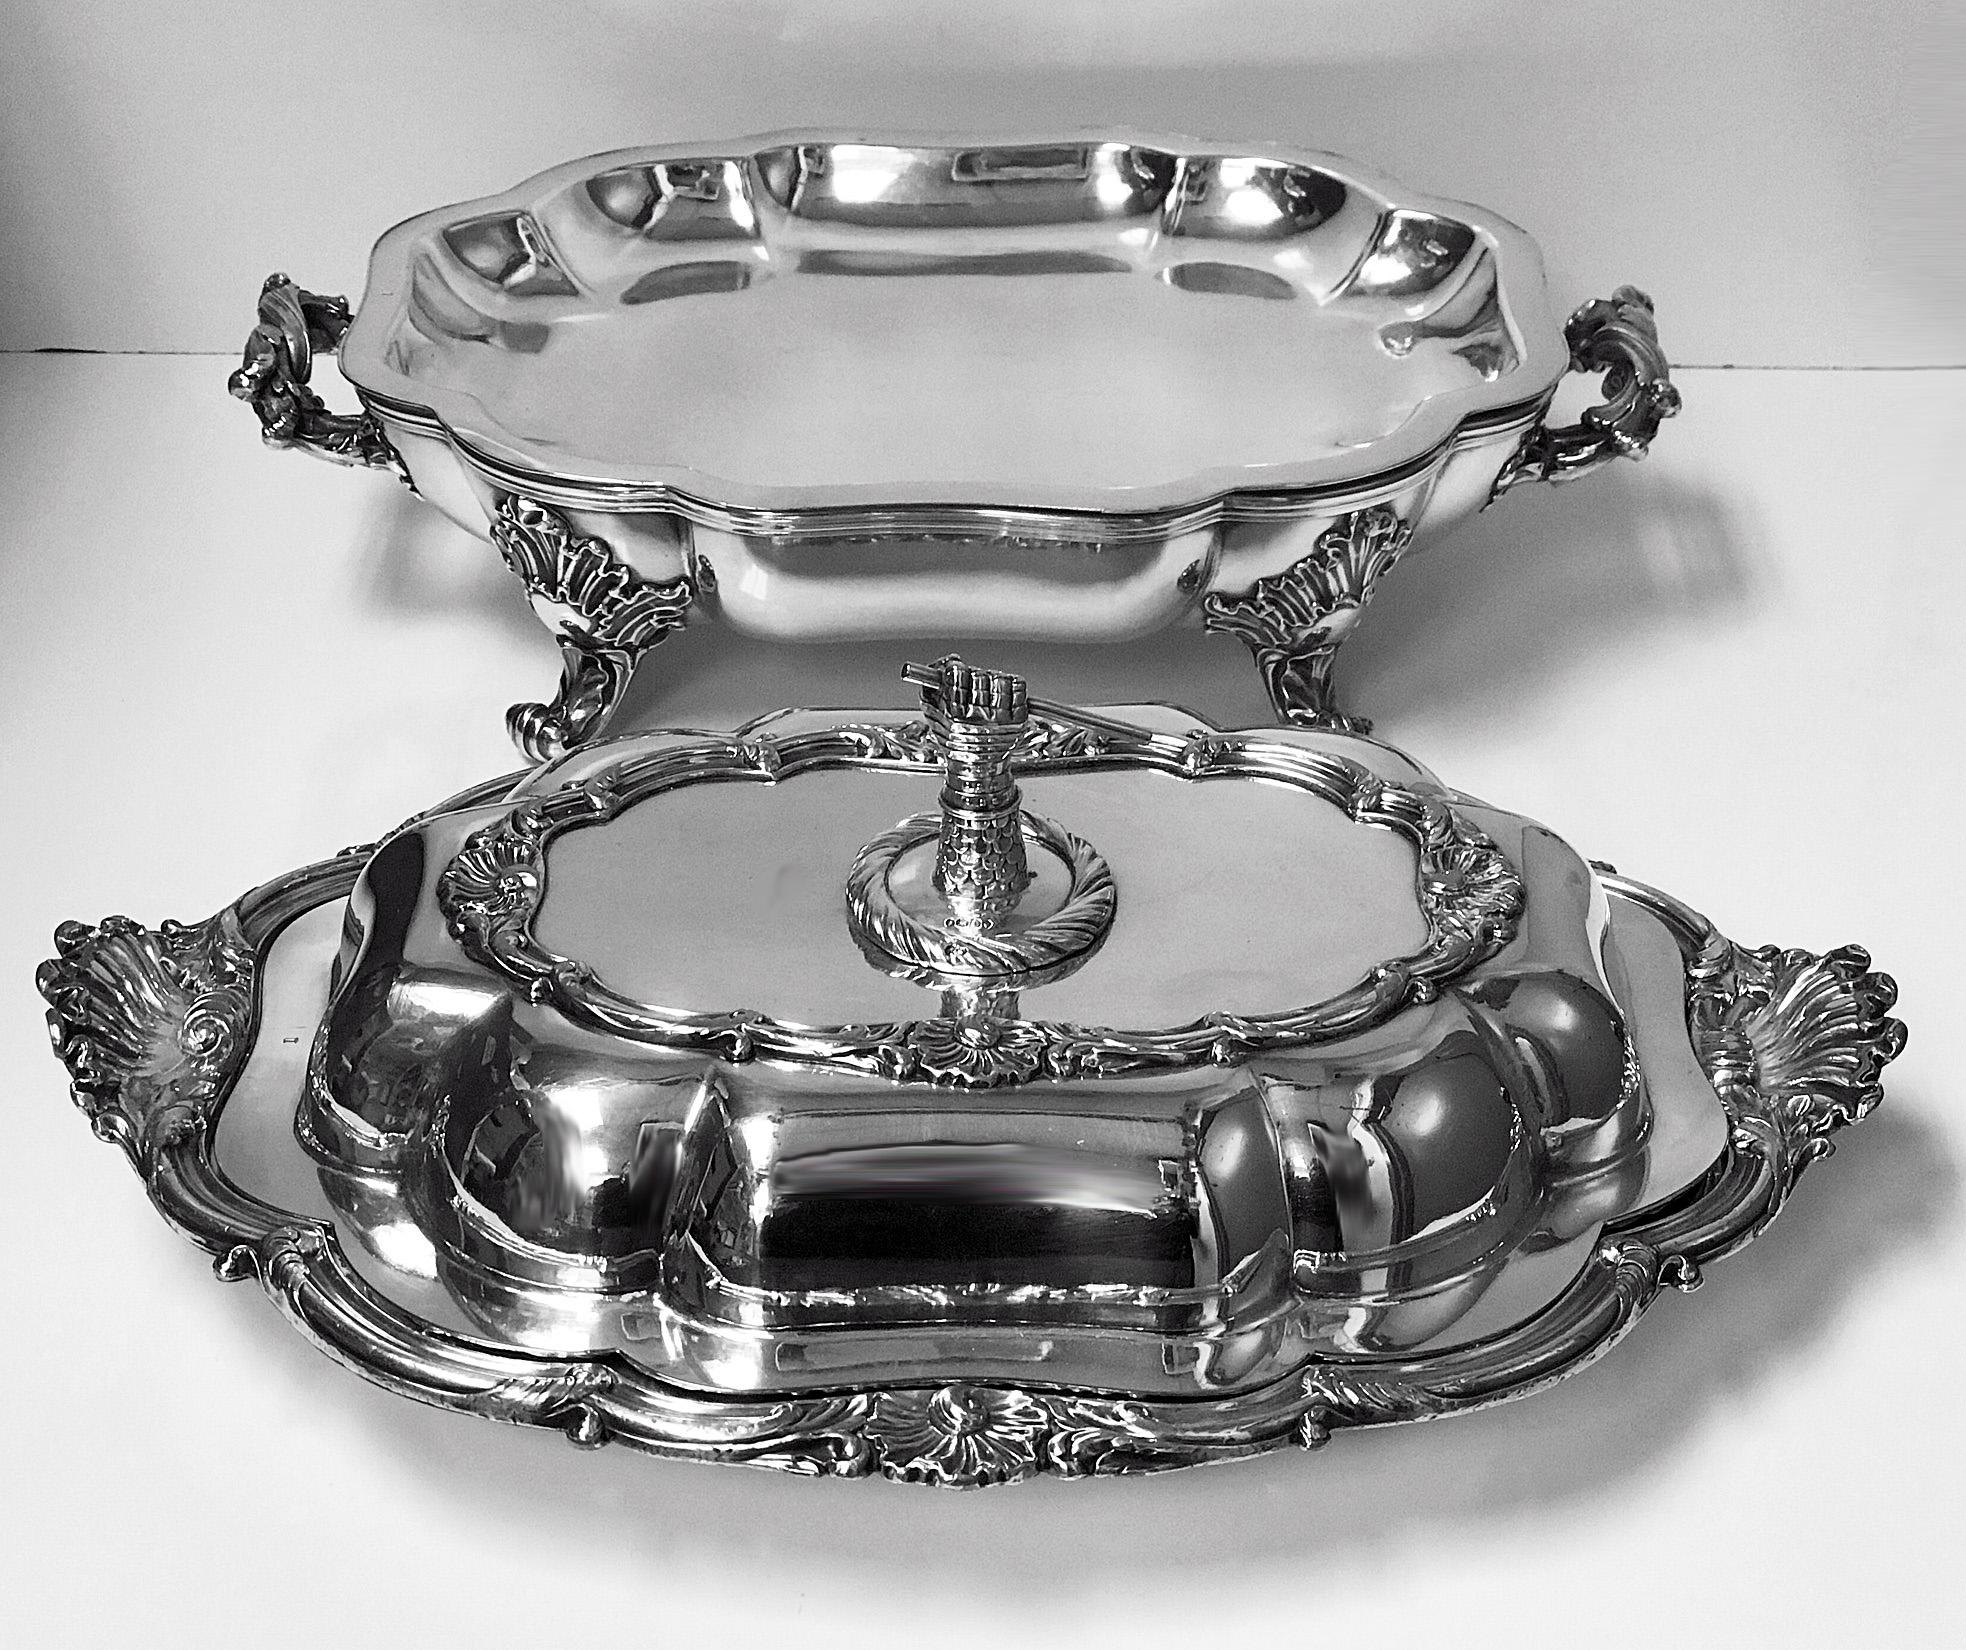 A very good quality Creswick Old Sheffield Entrée Dish, liner and Warming Stand with Paul Storr Silver handle. The Dish and Warmer with old Sheffield marks for T & J Creswick. Dish, under dish and finial also marked with the number 1. Embellished to